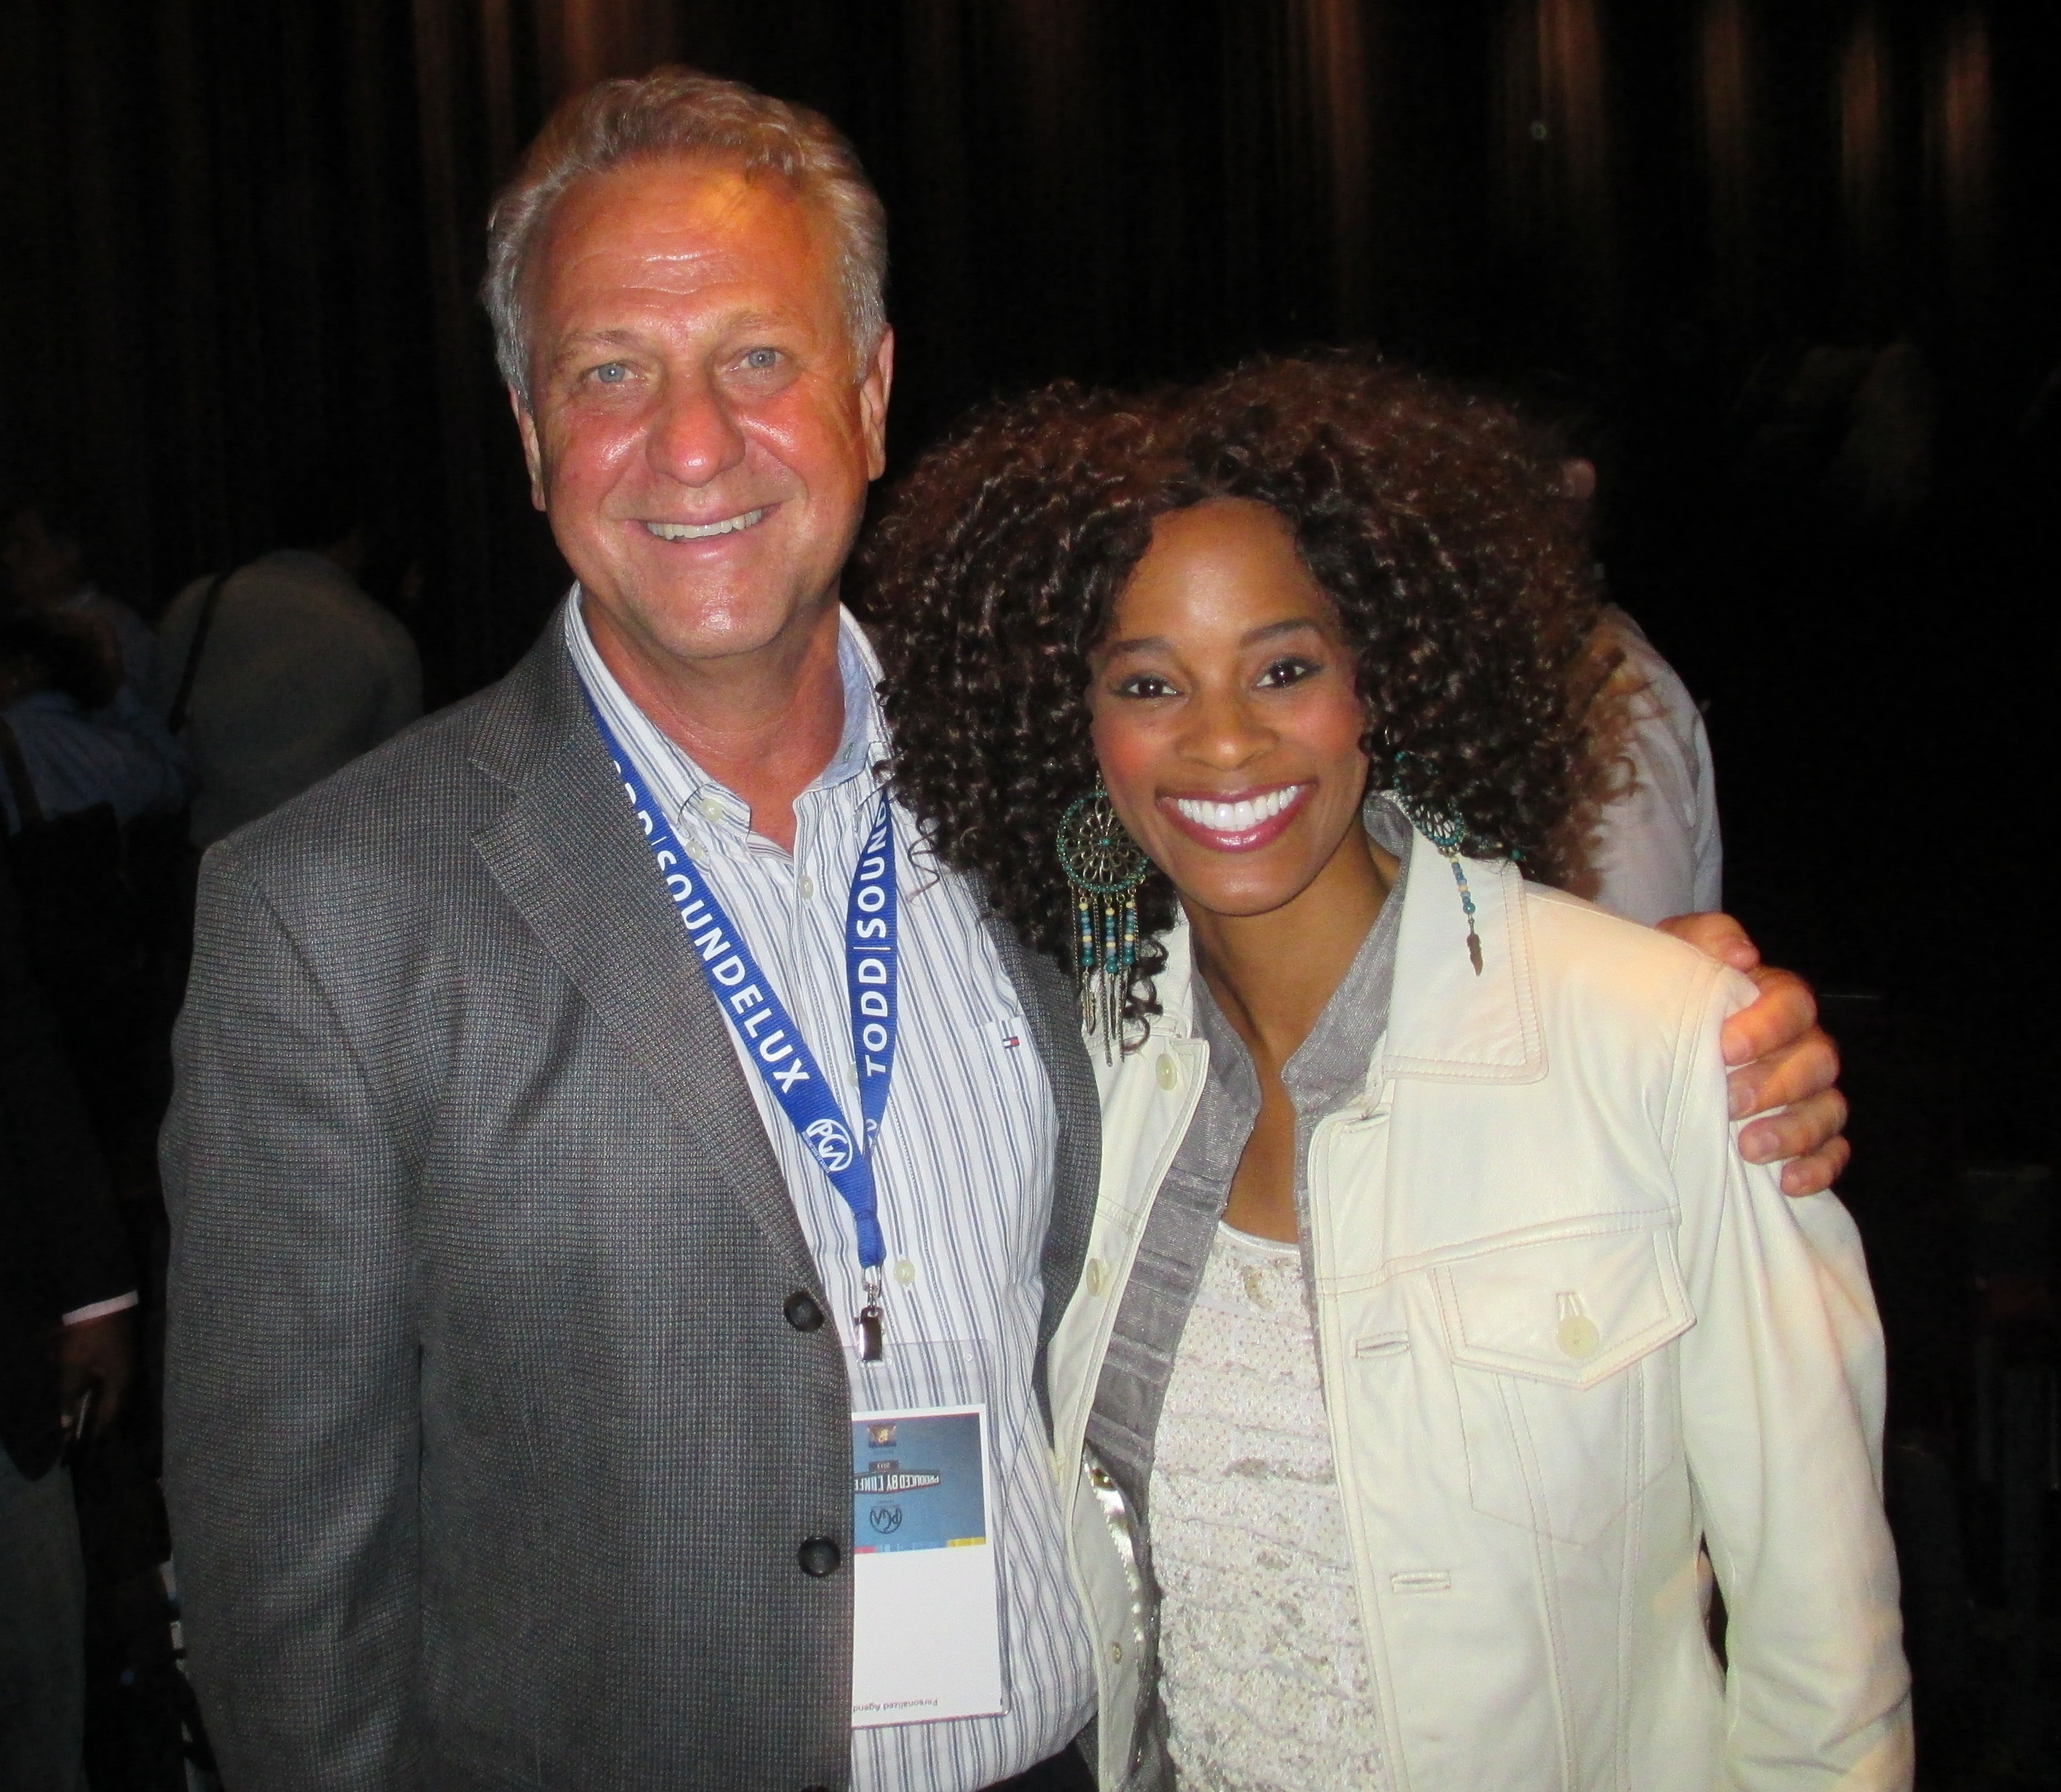 Actress Germany Kent with Vance Van Petten, Producers Guild of America Executive President